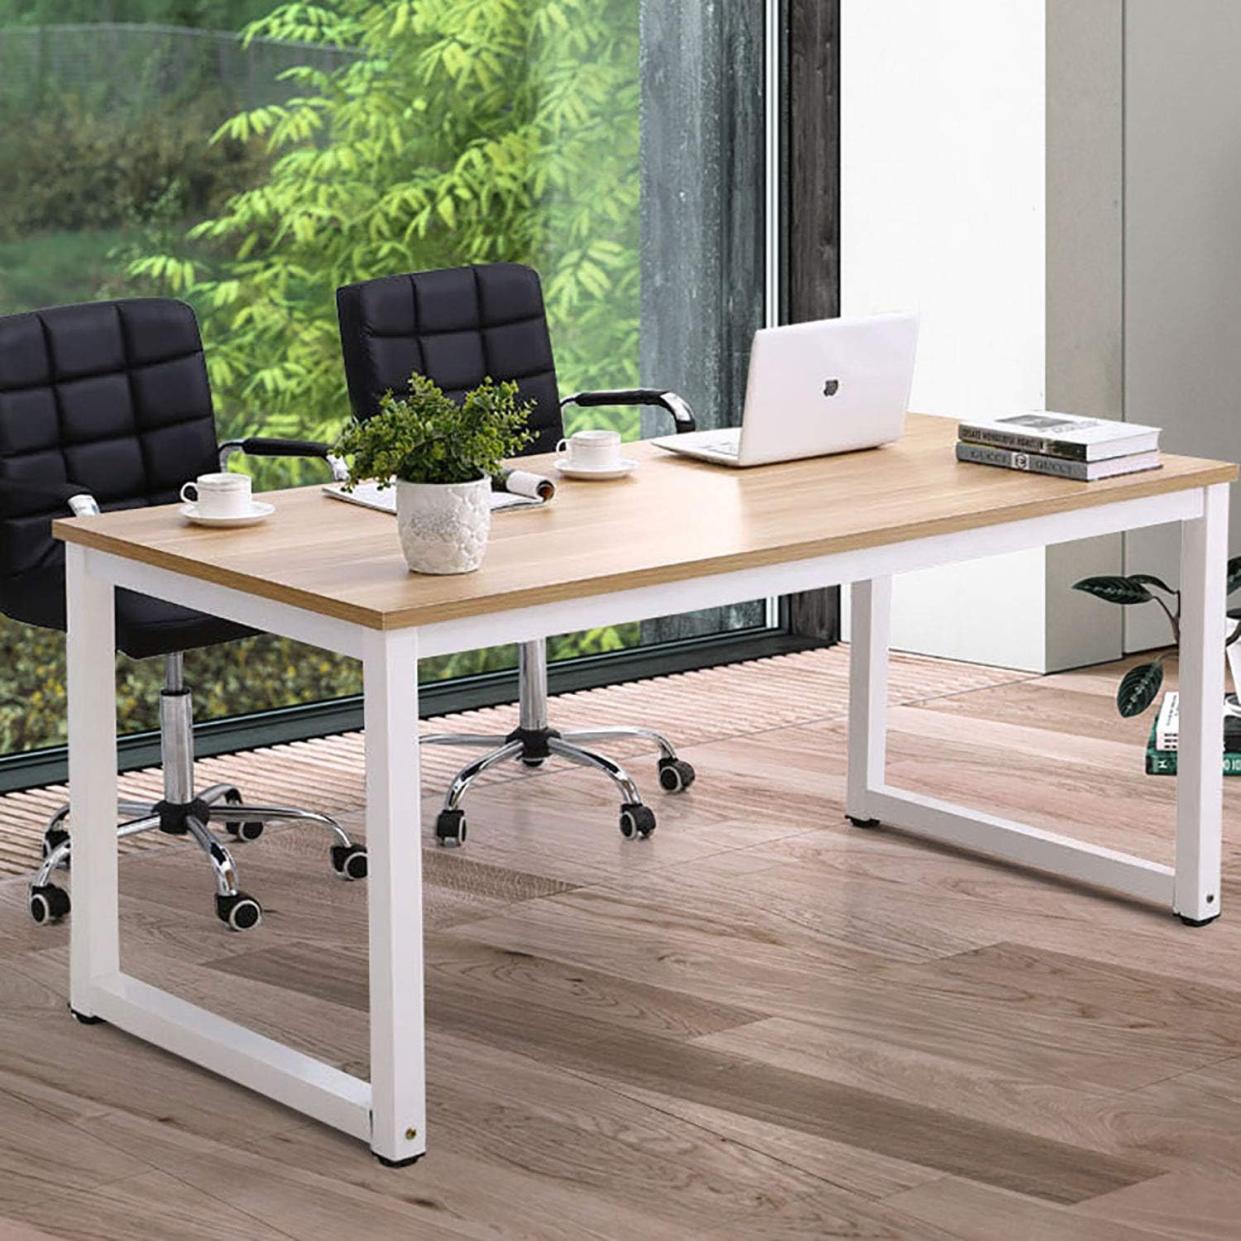 Standing Desks for Home Offices: Pros, Cons, and Things to Consider